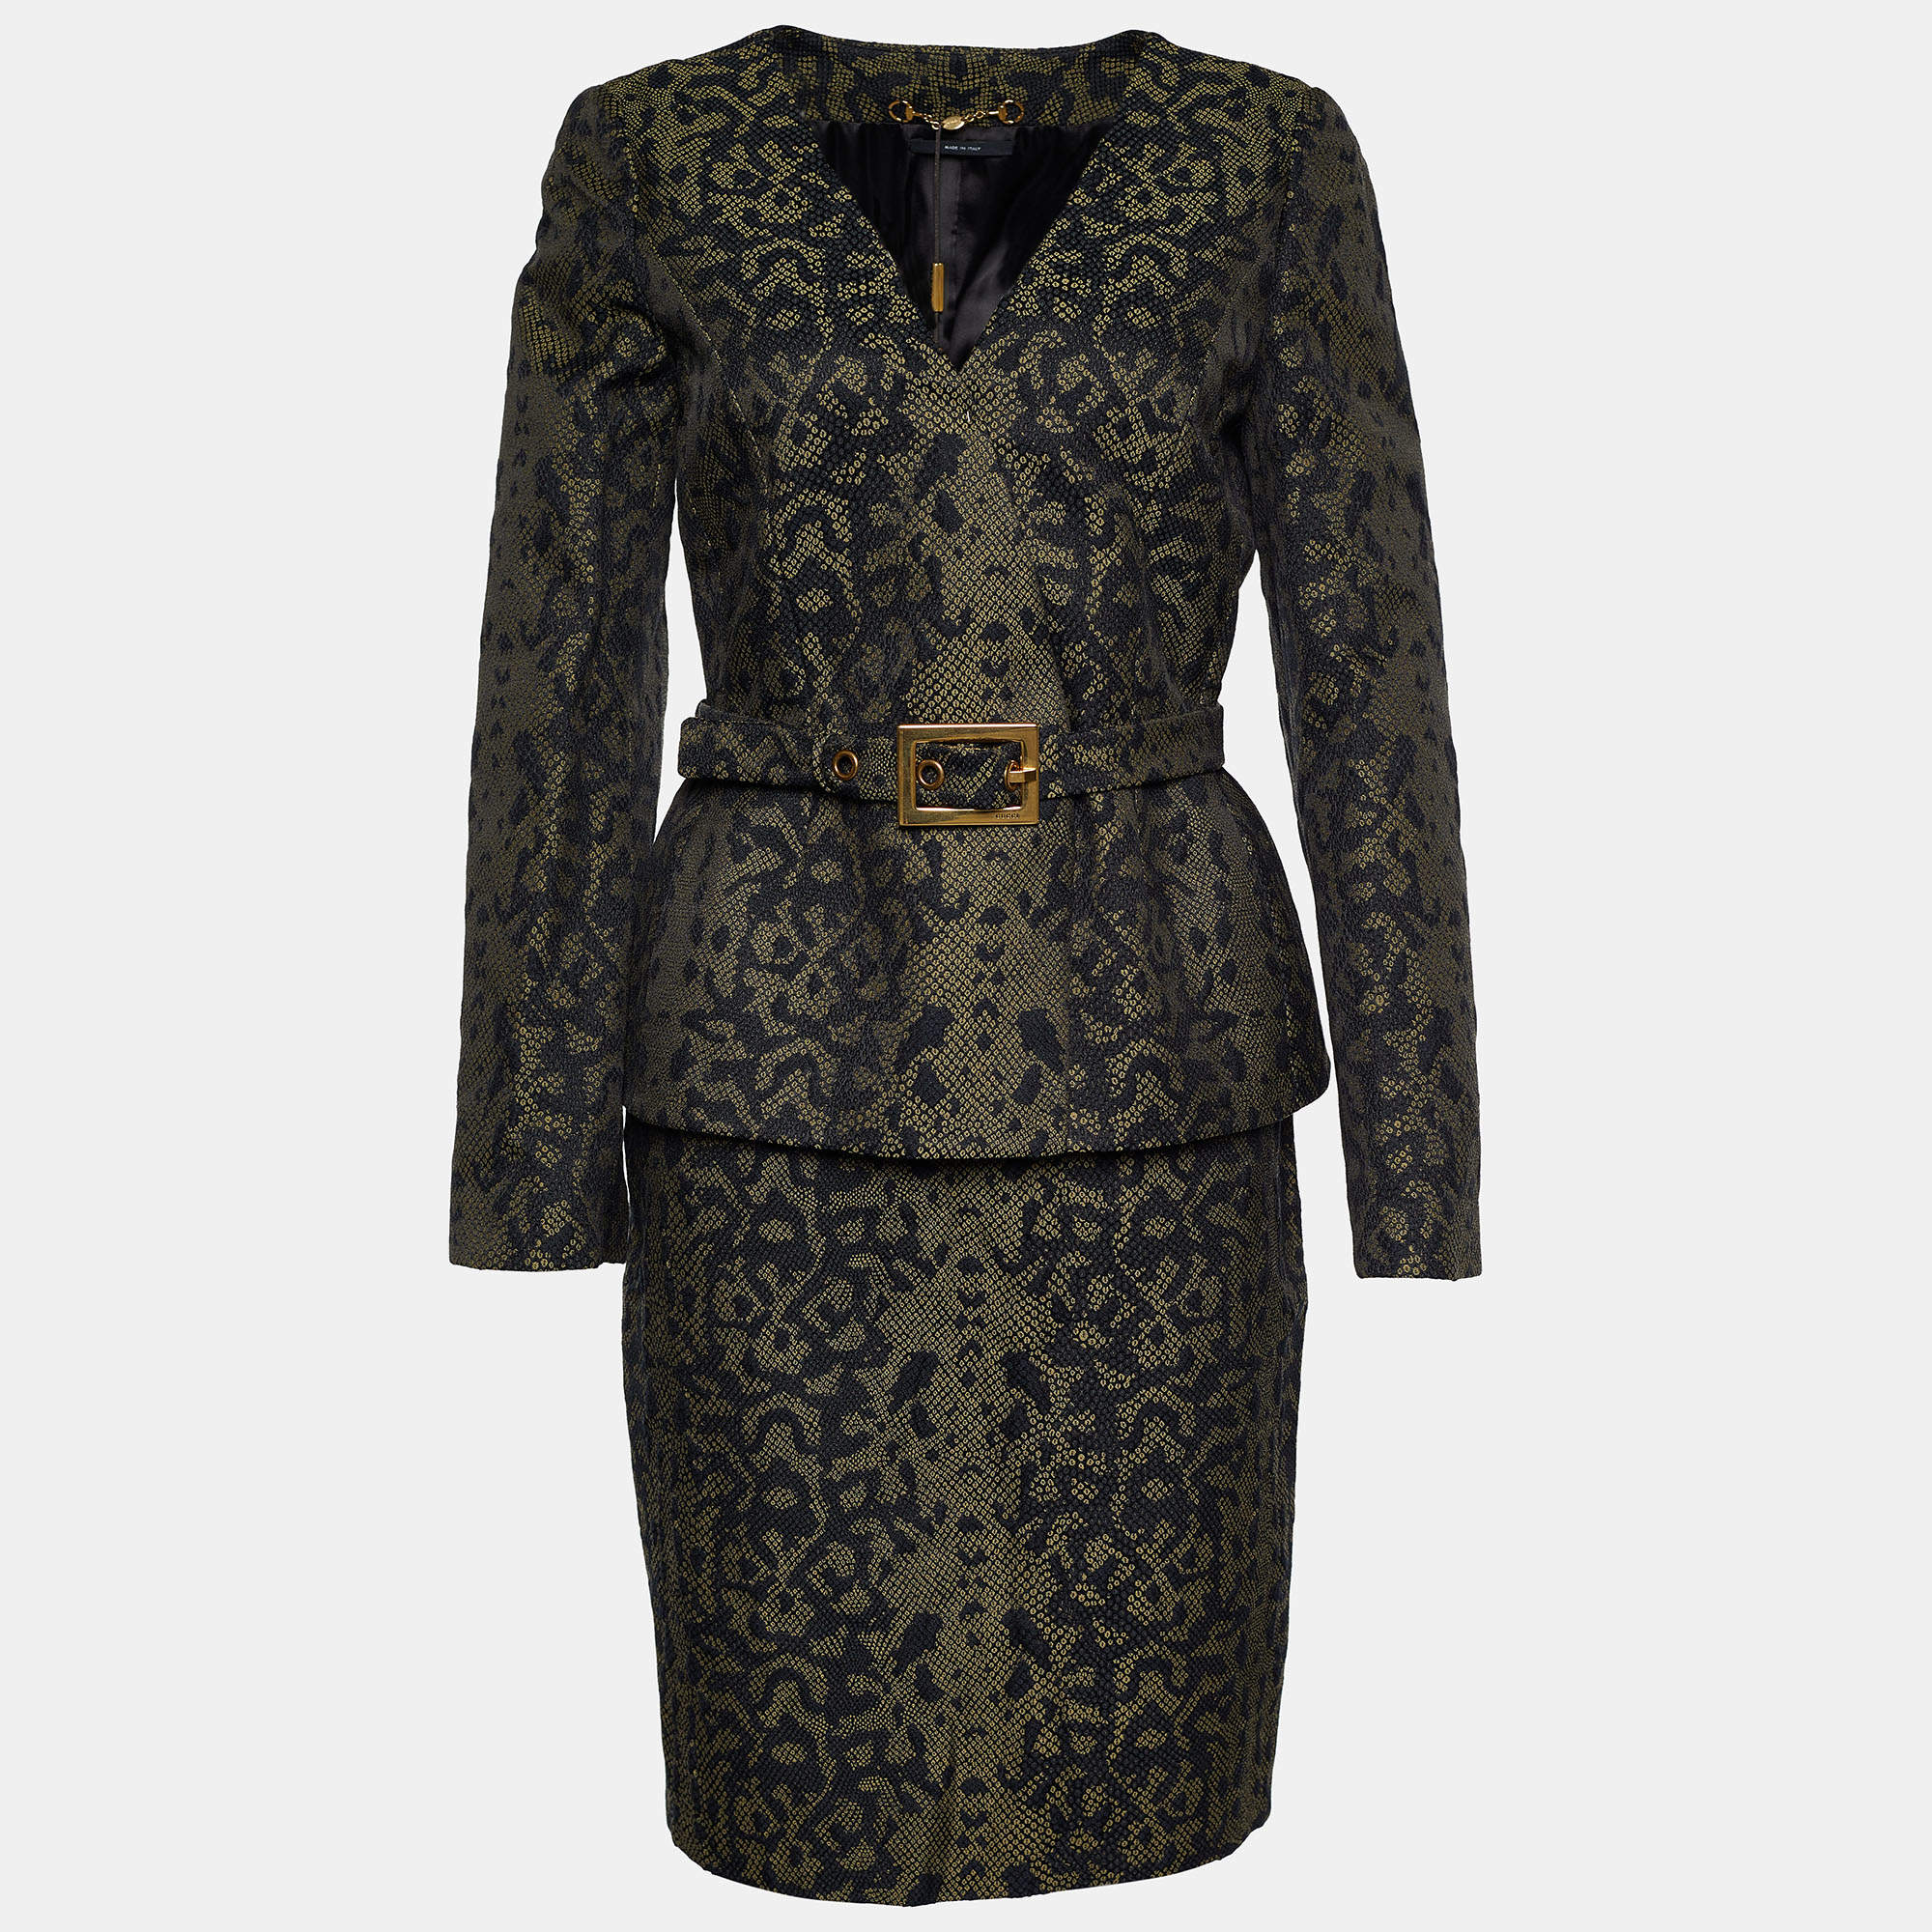 Gucci Green Animal Pattered Jacquard Skirt Suit M